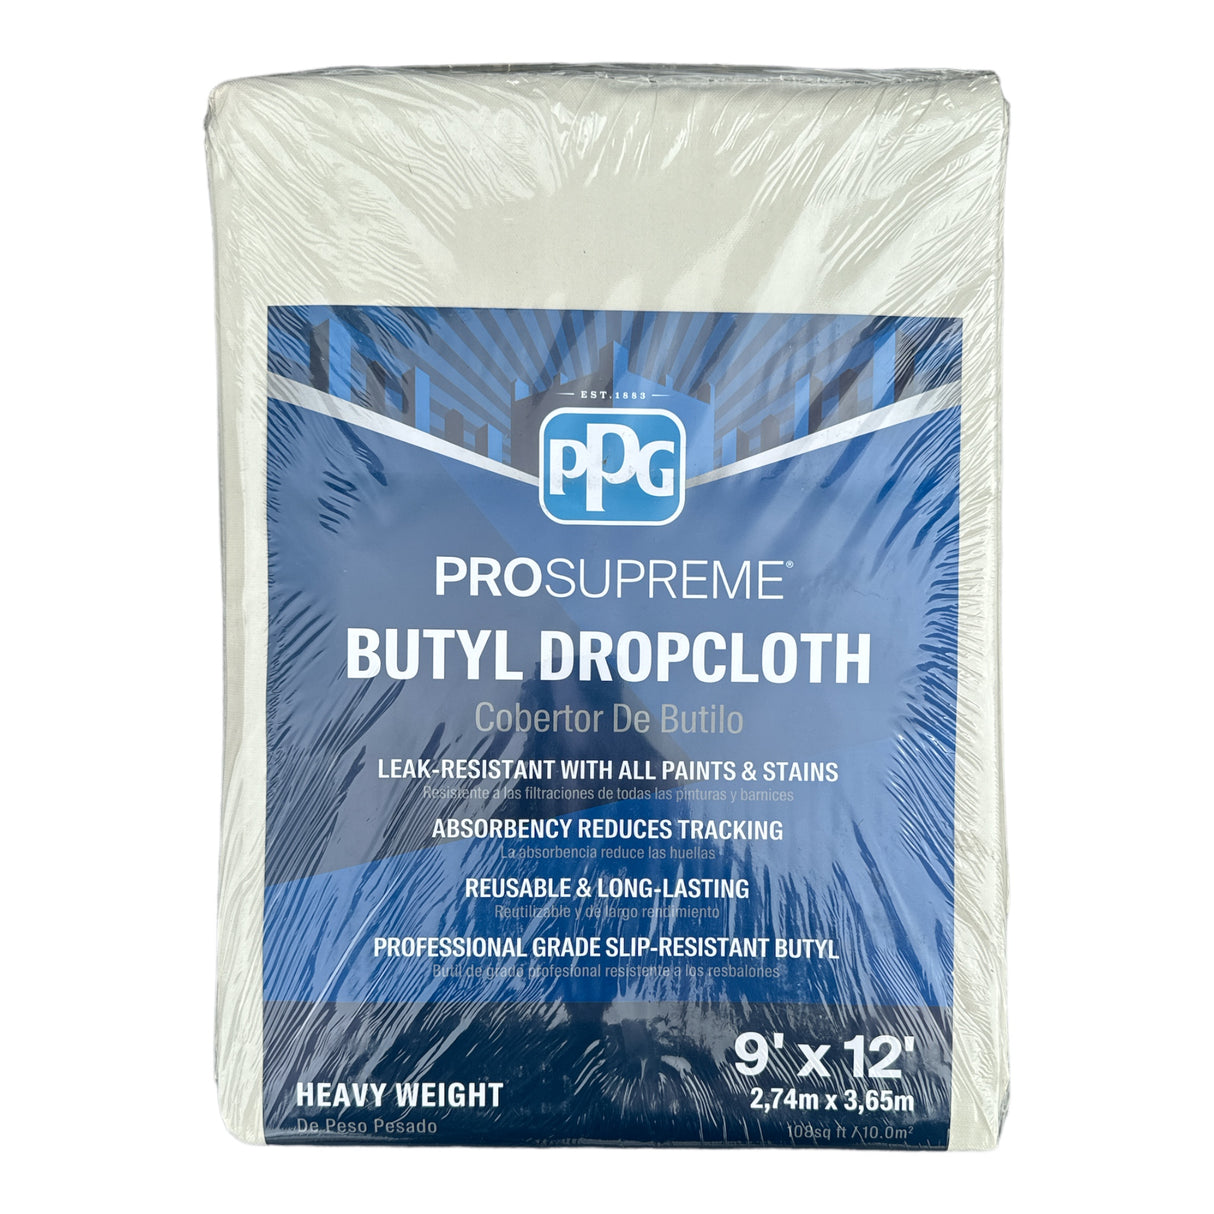 PPG ProSupreme Butyl Drop Cloth 9-Ft x 12-Ft (Heavy Weight)